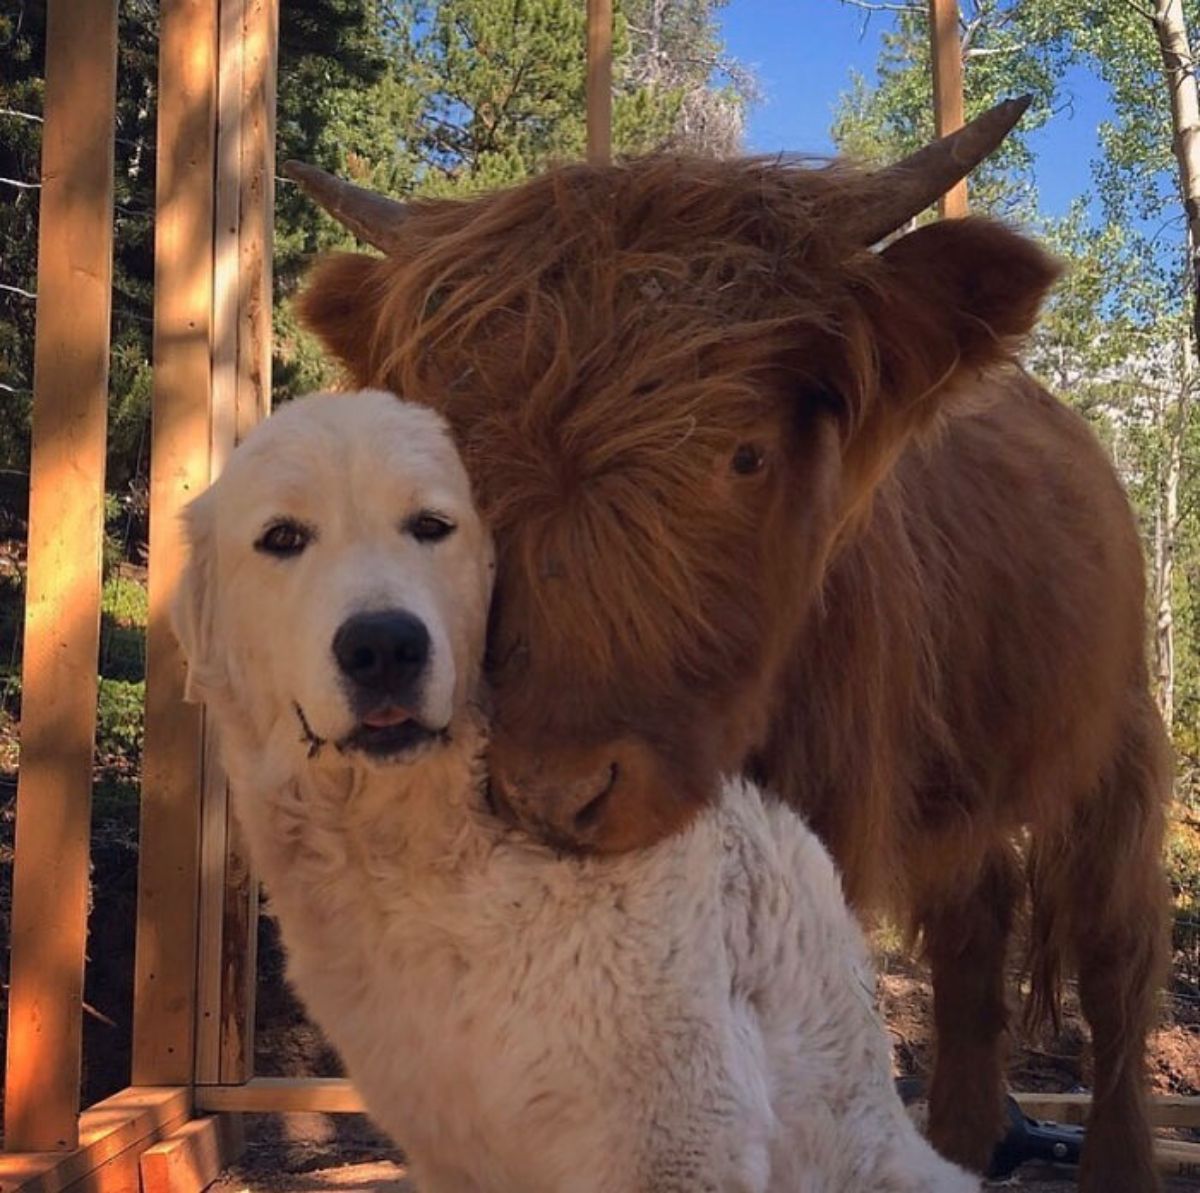 fluffy white dog with a fluffy brown bull putting its chin on the dog's back